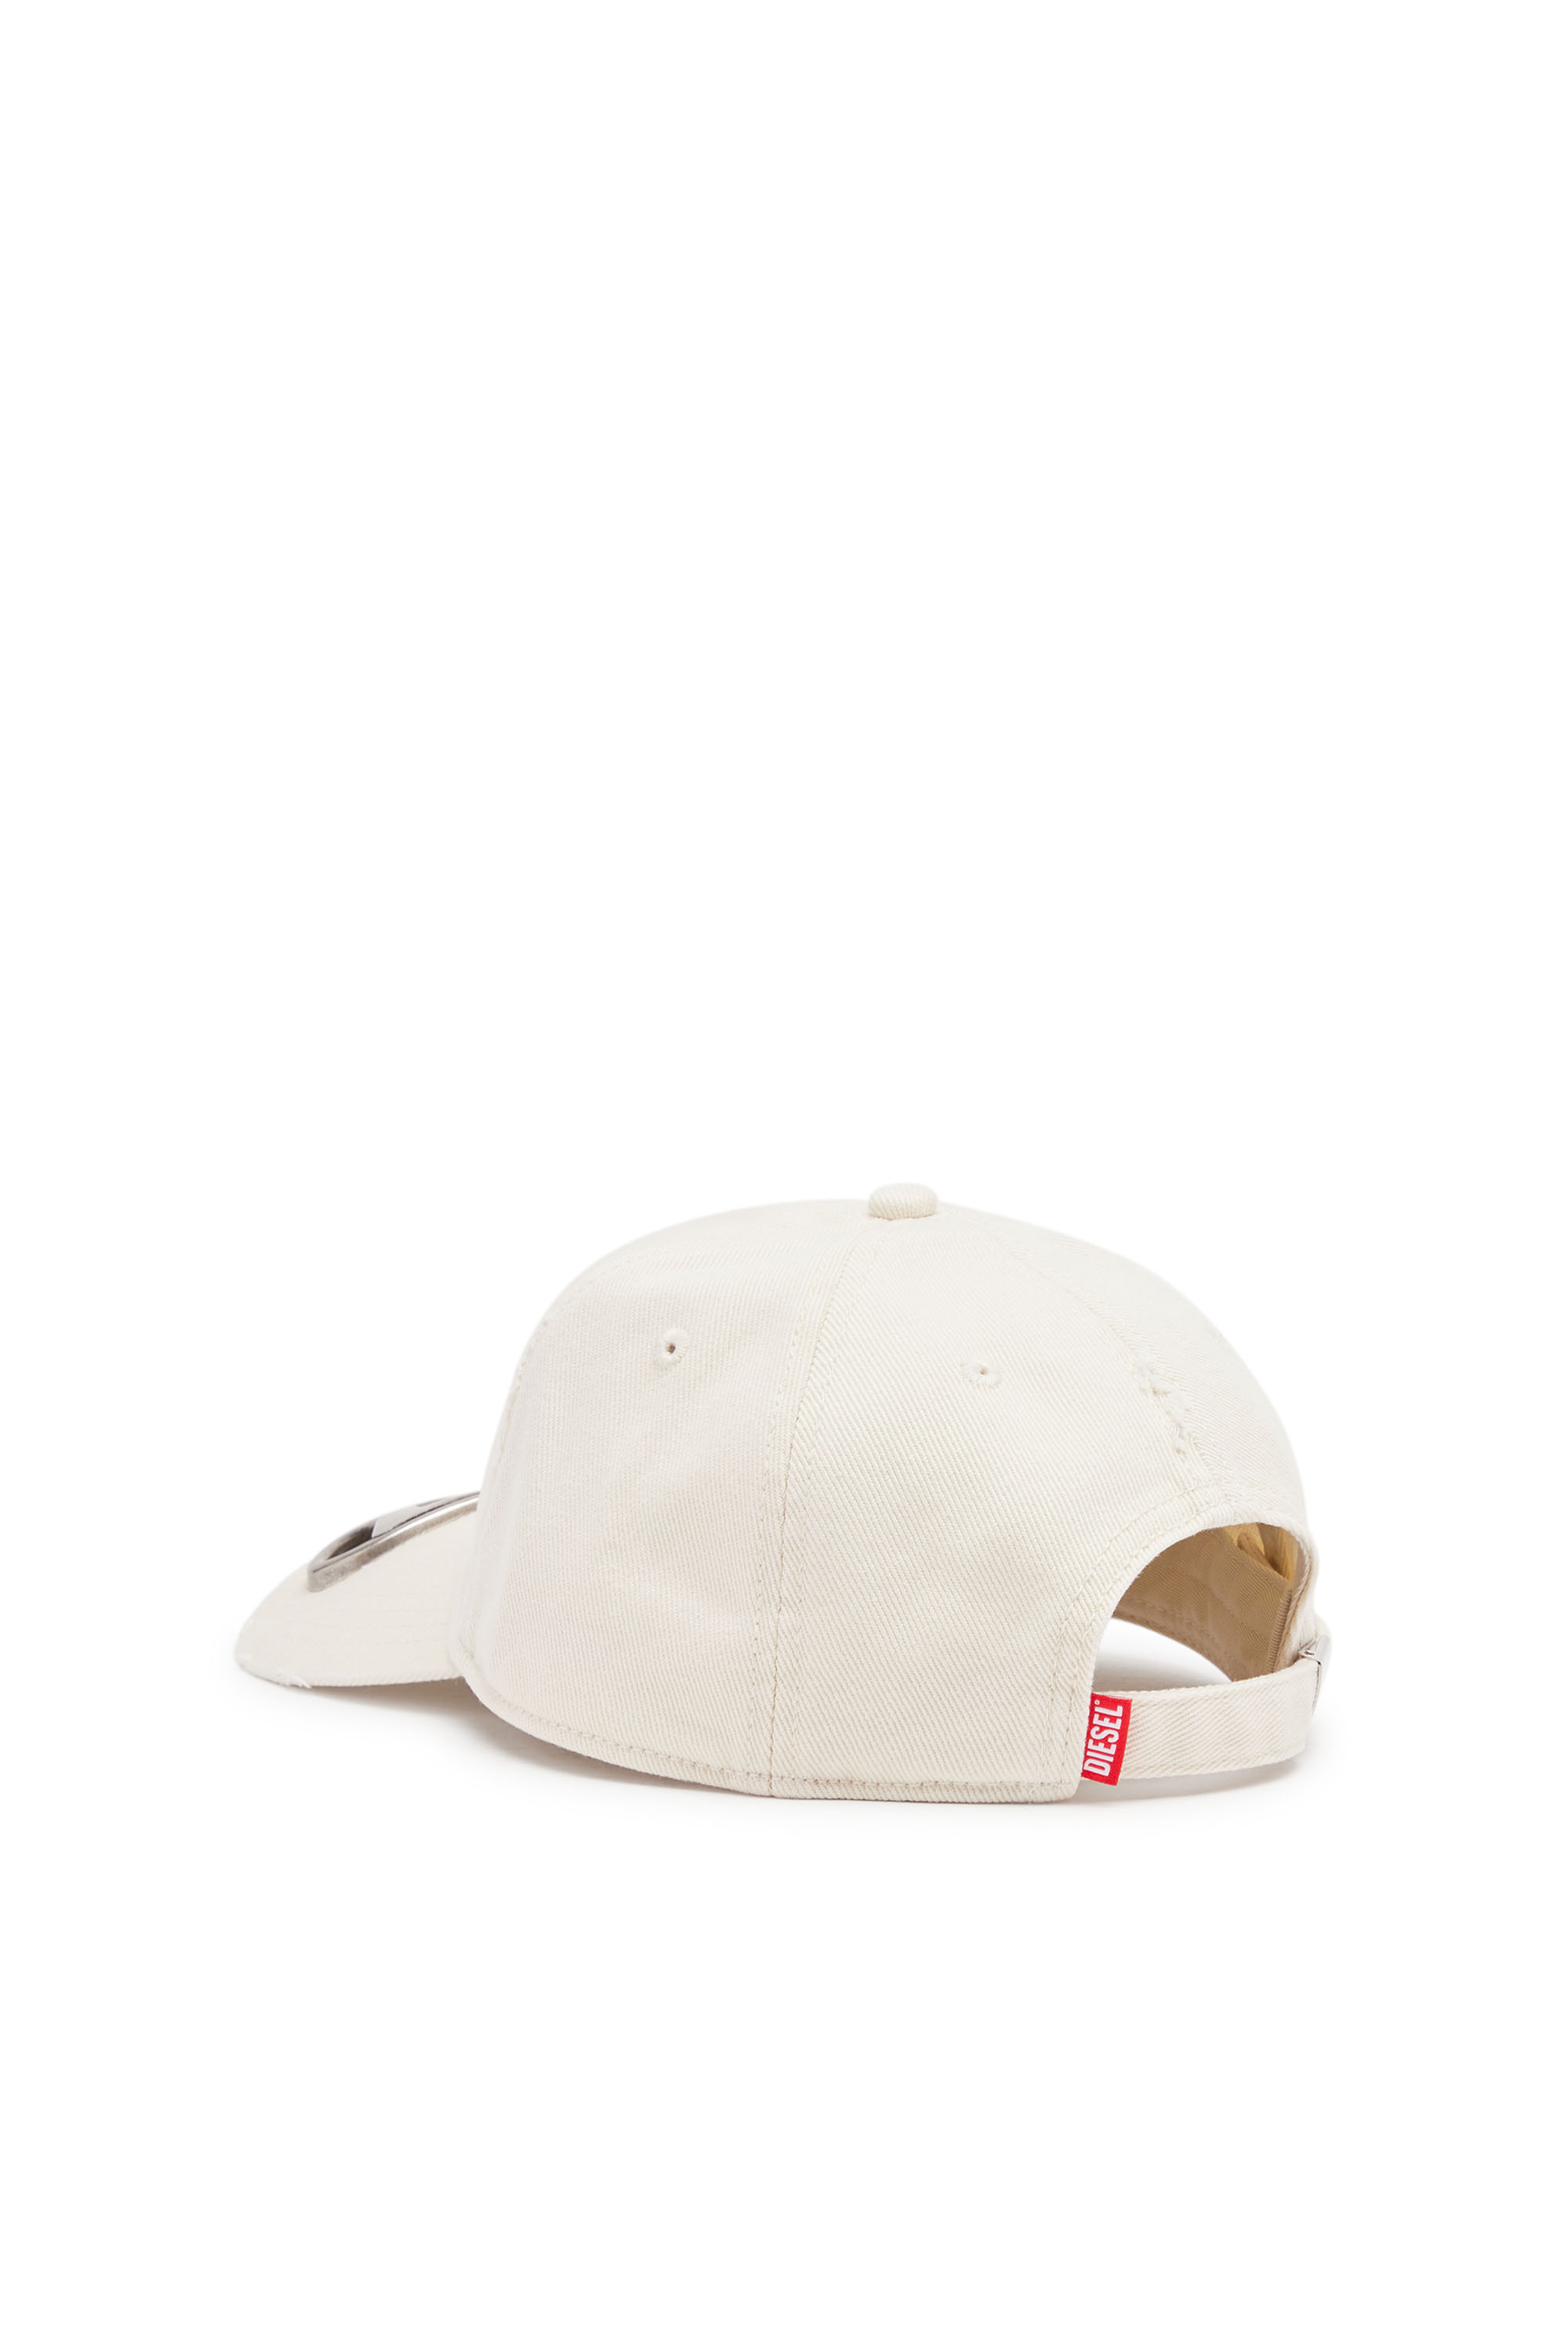 Diesel - C-BEAST-A1, Man Baseball cap with metal Oval D plaque in White - Image 2